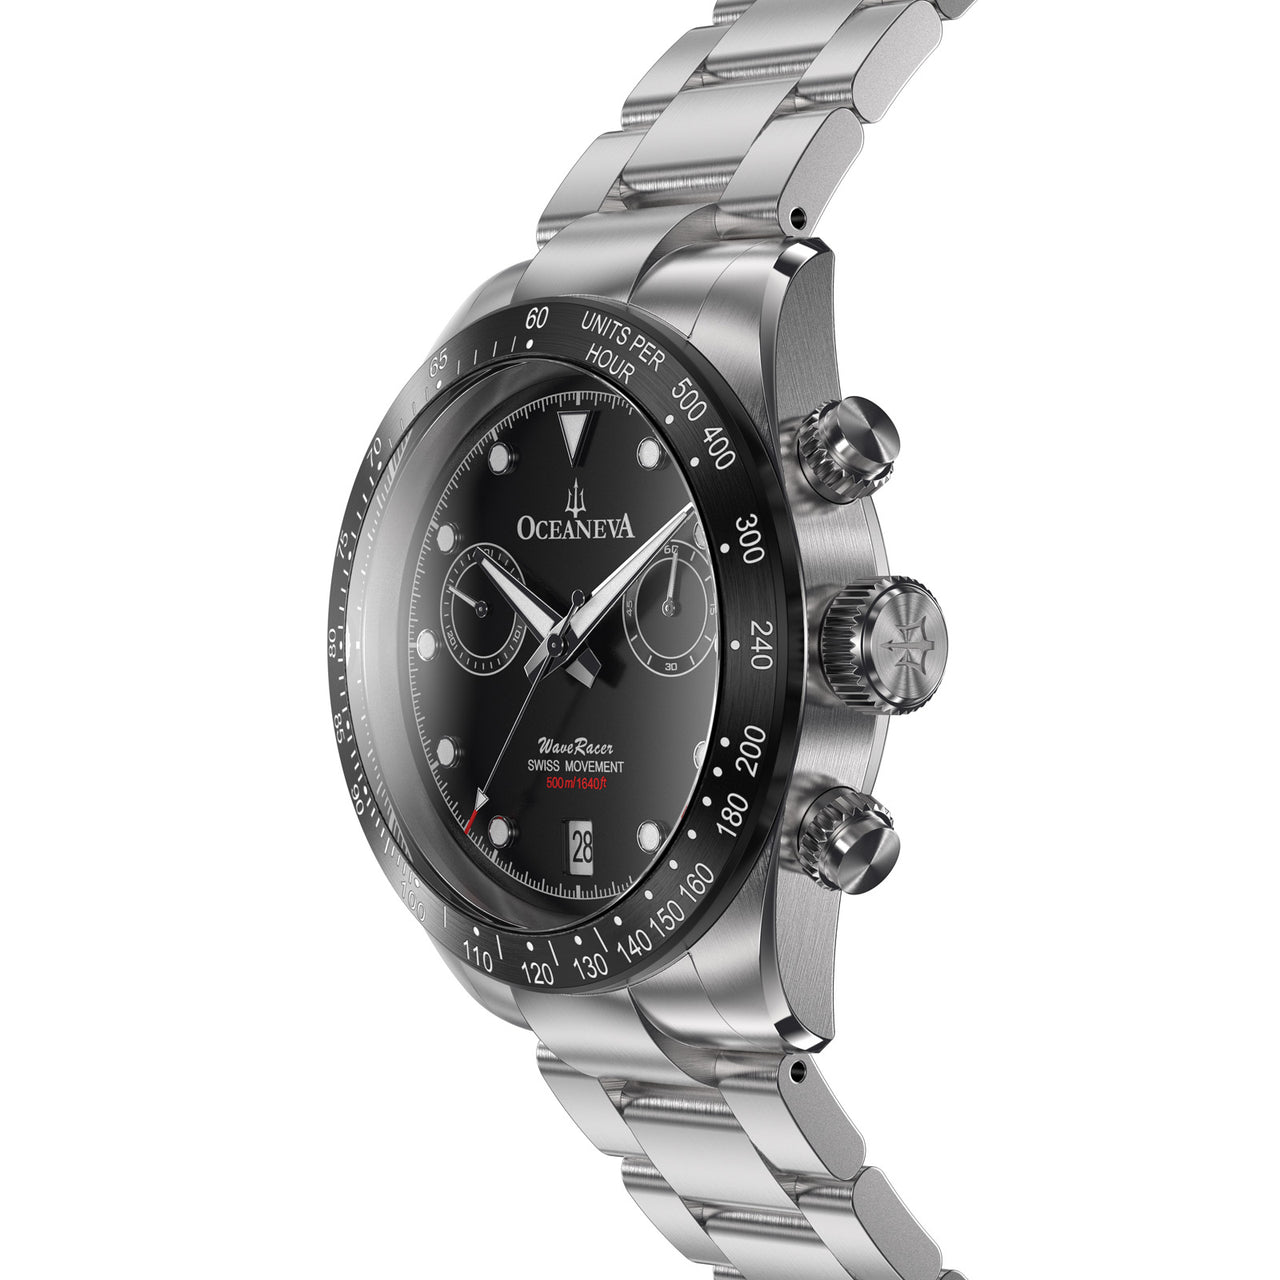 Oceaneva Black Dial Chronograph Watch Side View Crown